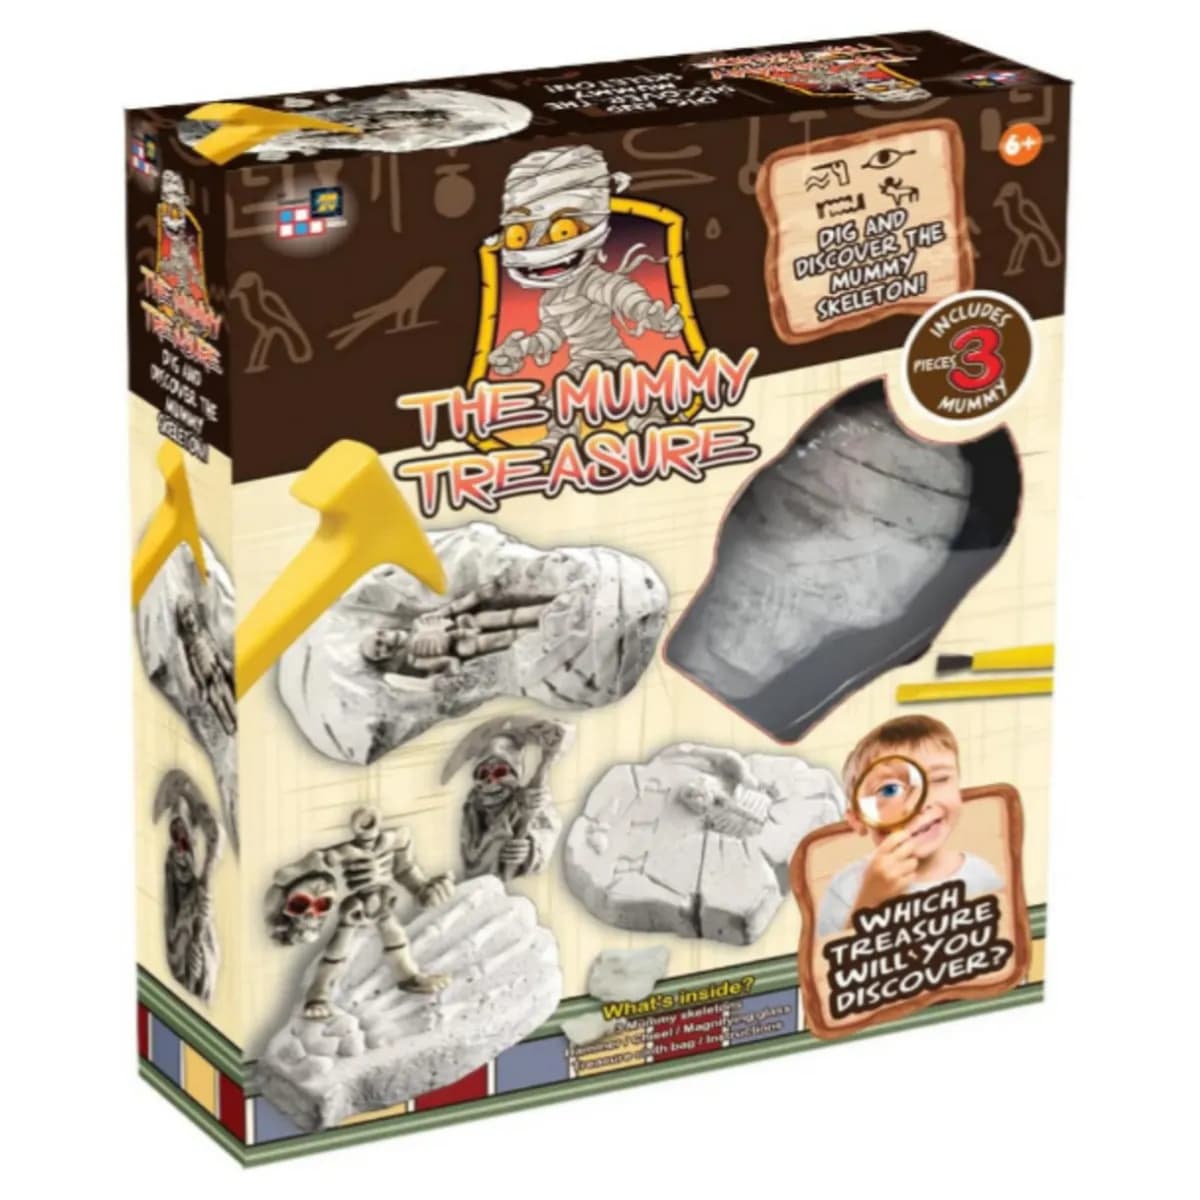 THE MUMMY Theme Treasure Hunt STEM Toys - Dig Blocks With Creative Surprise In Each Block - SMFS41